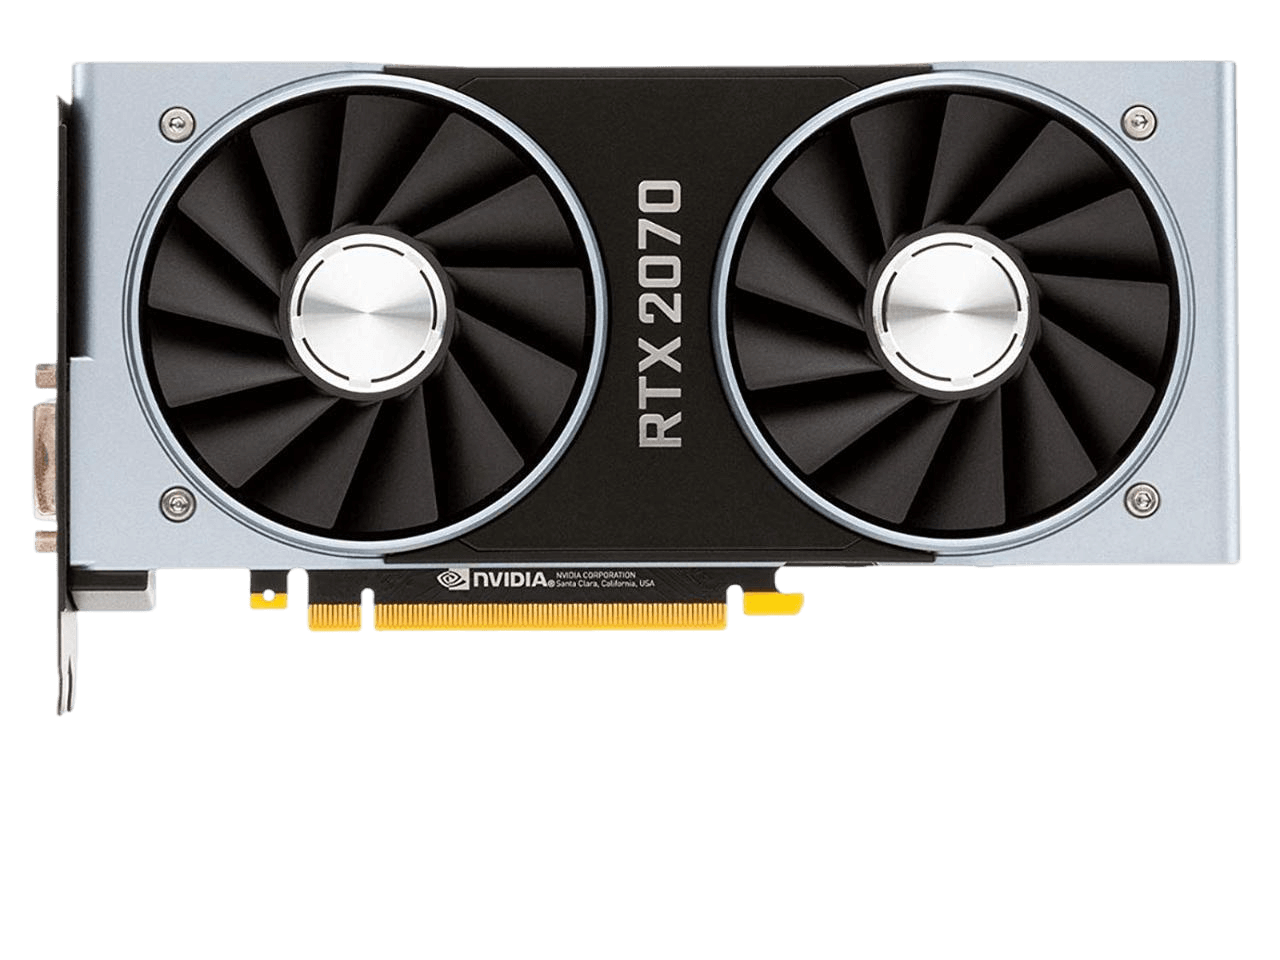 NVIDIA GeForce RTX 2070 Founders Edition 8GB GDDR6 PIC Express 3.1 Graphic Card